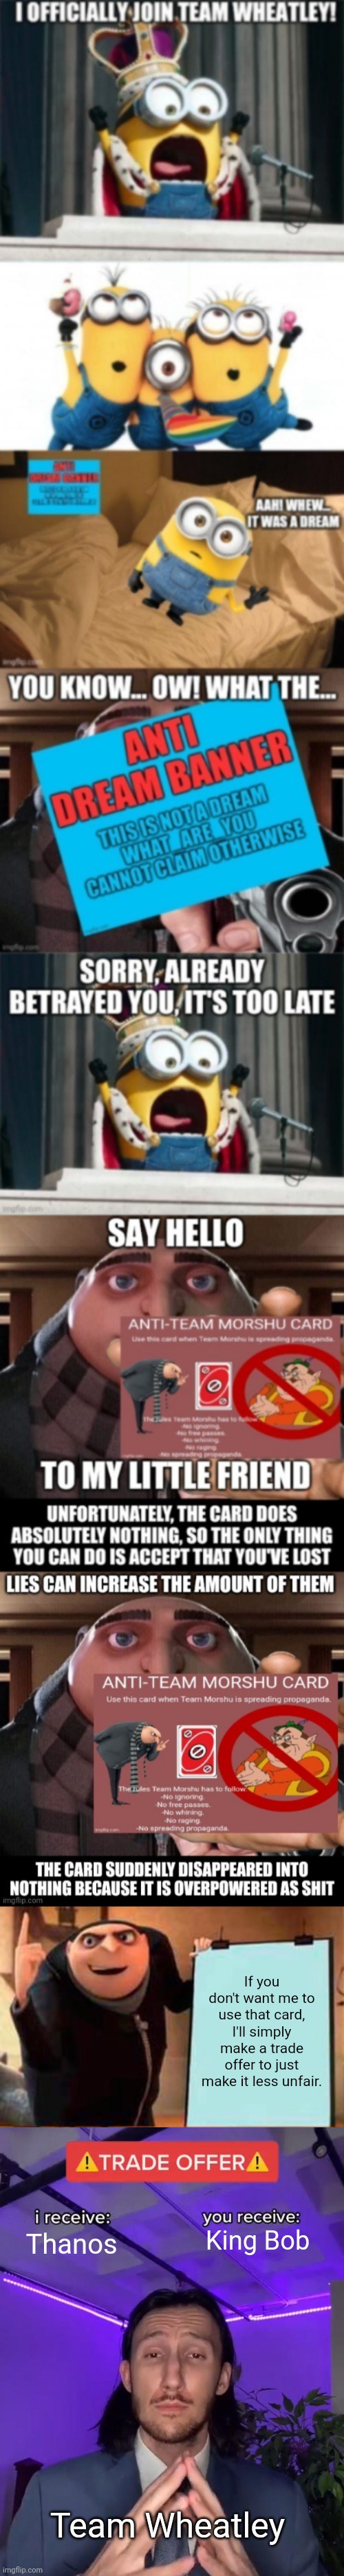 He's more likely to pick King Bob, also if he picks none of the options (Which doesn't count), it'll make him even more greedy. | If you don't want me to use that card, I'll simply make a trade offer to just make it less unfair. King Bob; Thanos; Team Wheatley | image tagged in memes,gru's plan,trade offer | made w/ Imgflip meme maker